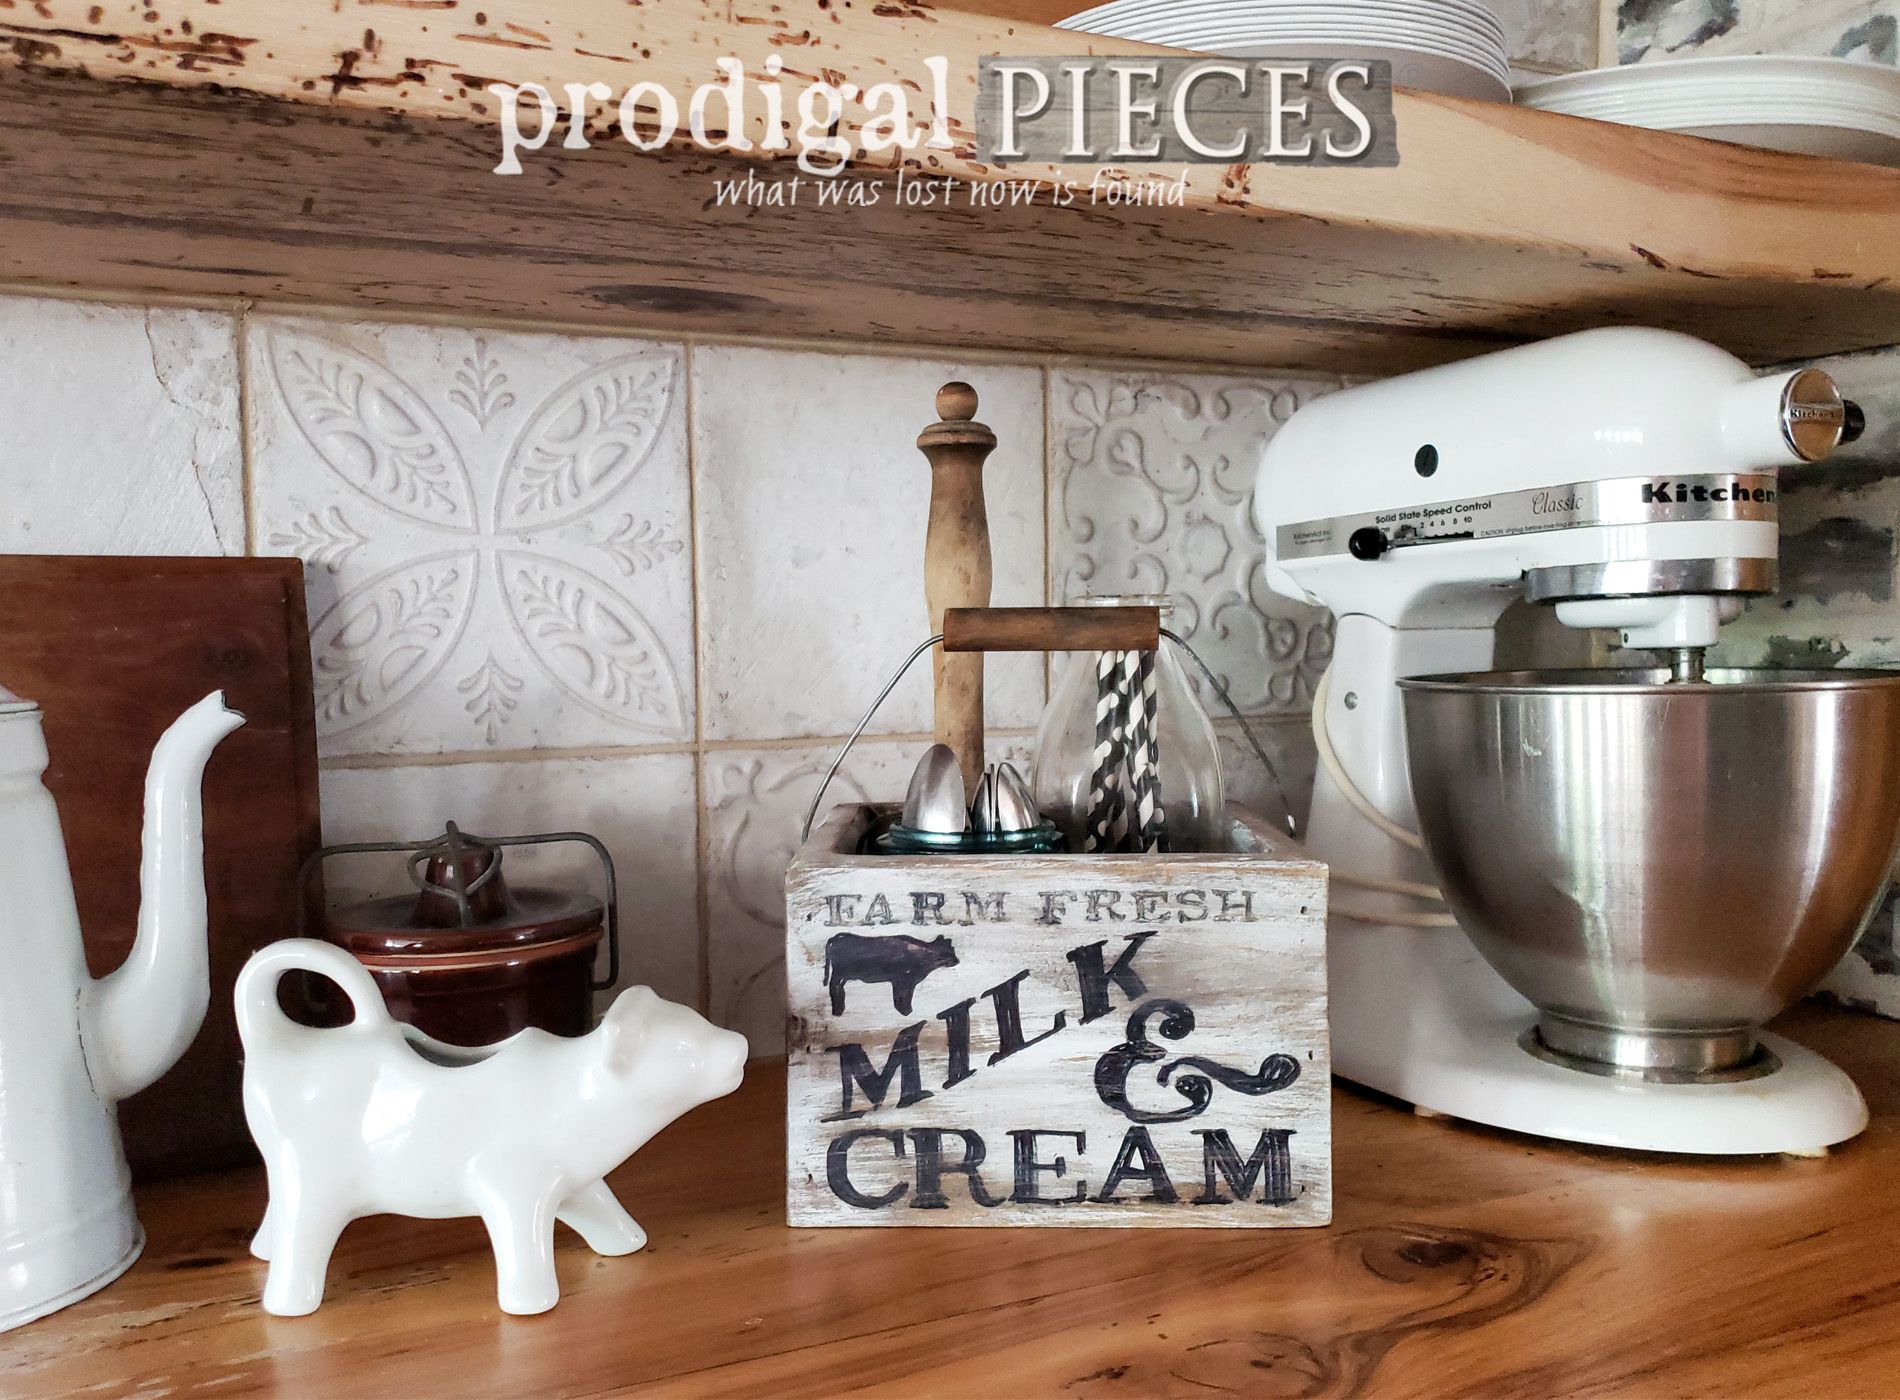 Create your own storage from a thrifted find like this Upcycled Farmhouse Kitchen Caddy | Video tutorial at prodigalpieces.com #prodigalpieces #farmhouse #diy #home #homedecor #kitchen #storage